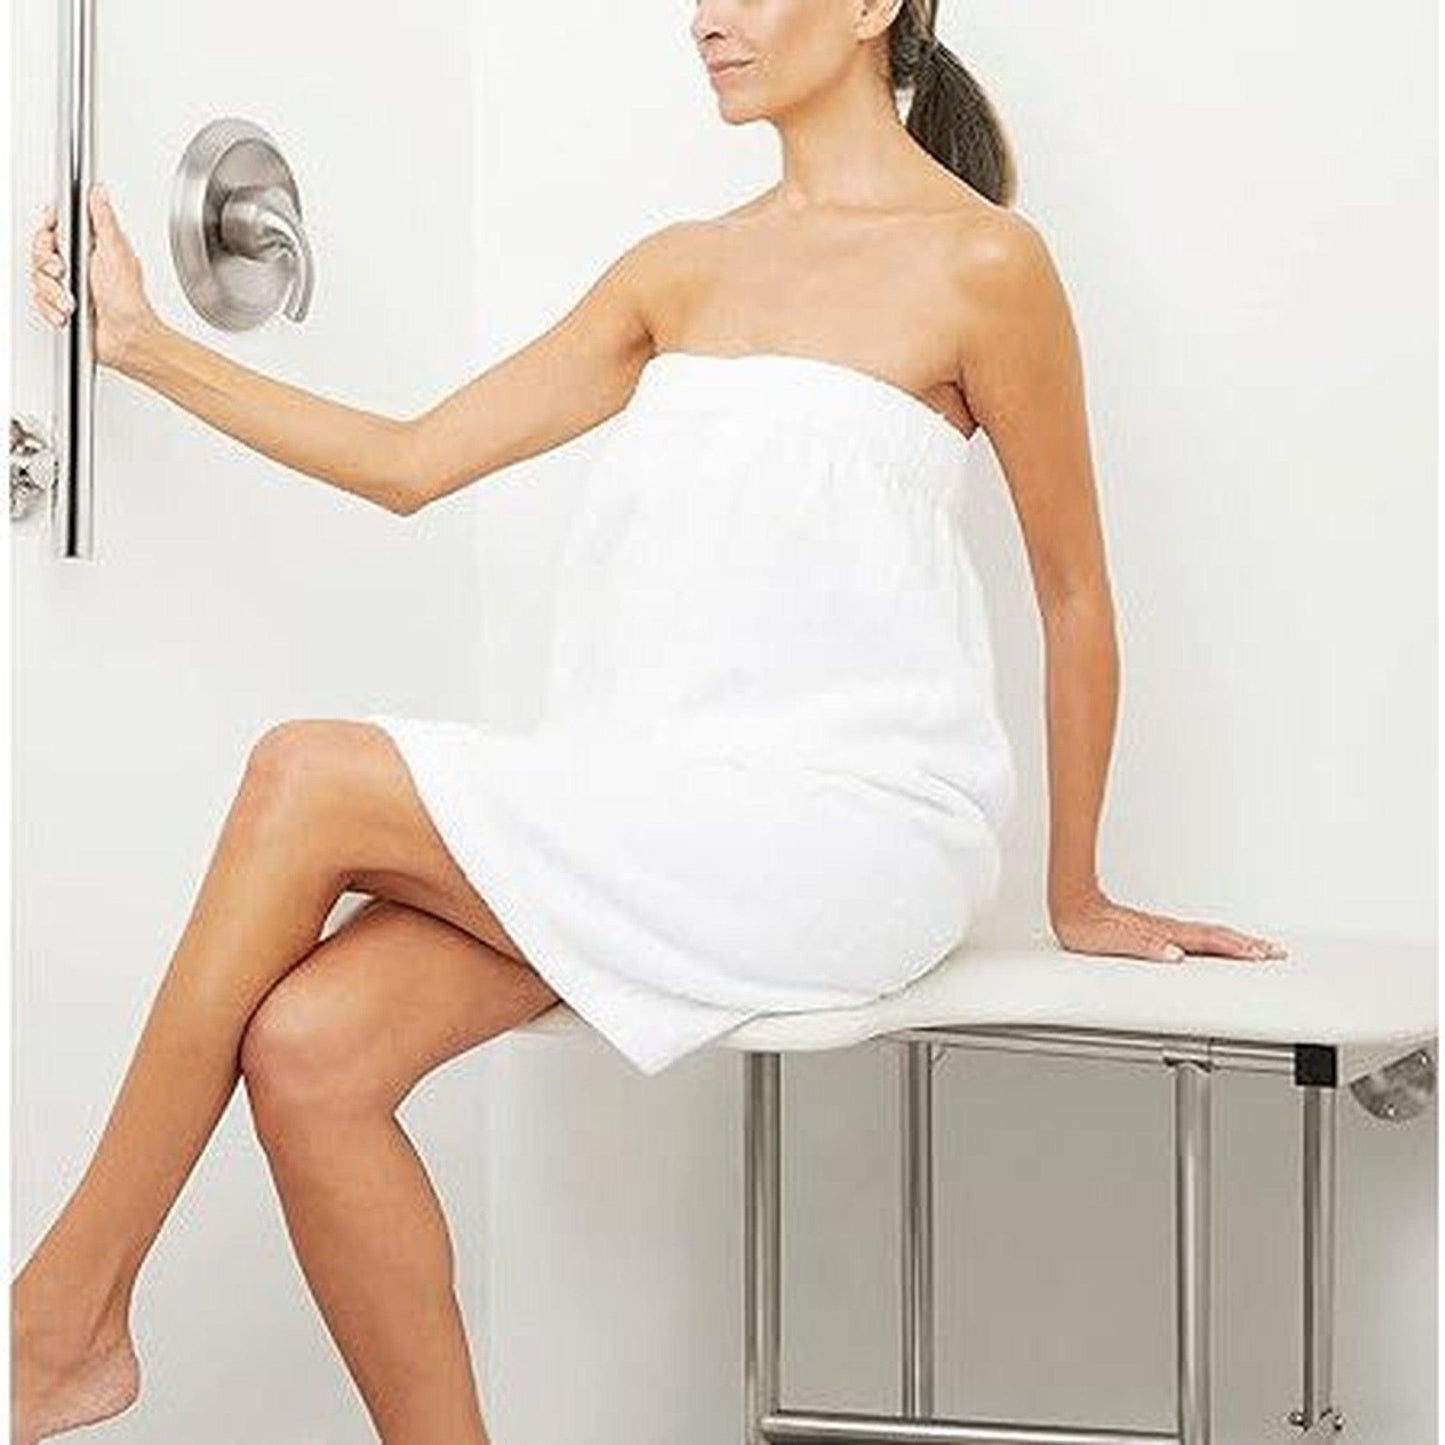 Seachrome Signature Series 32" W x 23" D Naugahyde White Cushion Right-Handed Configuration L-Shaped Transfer Shower Seat With Swing-Down Legs